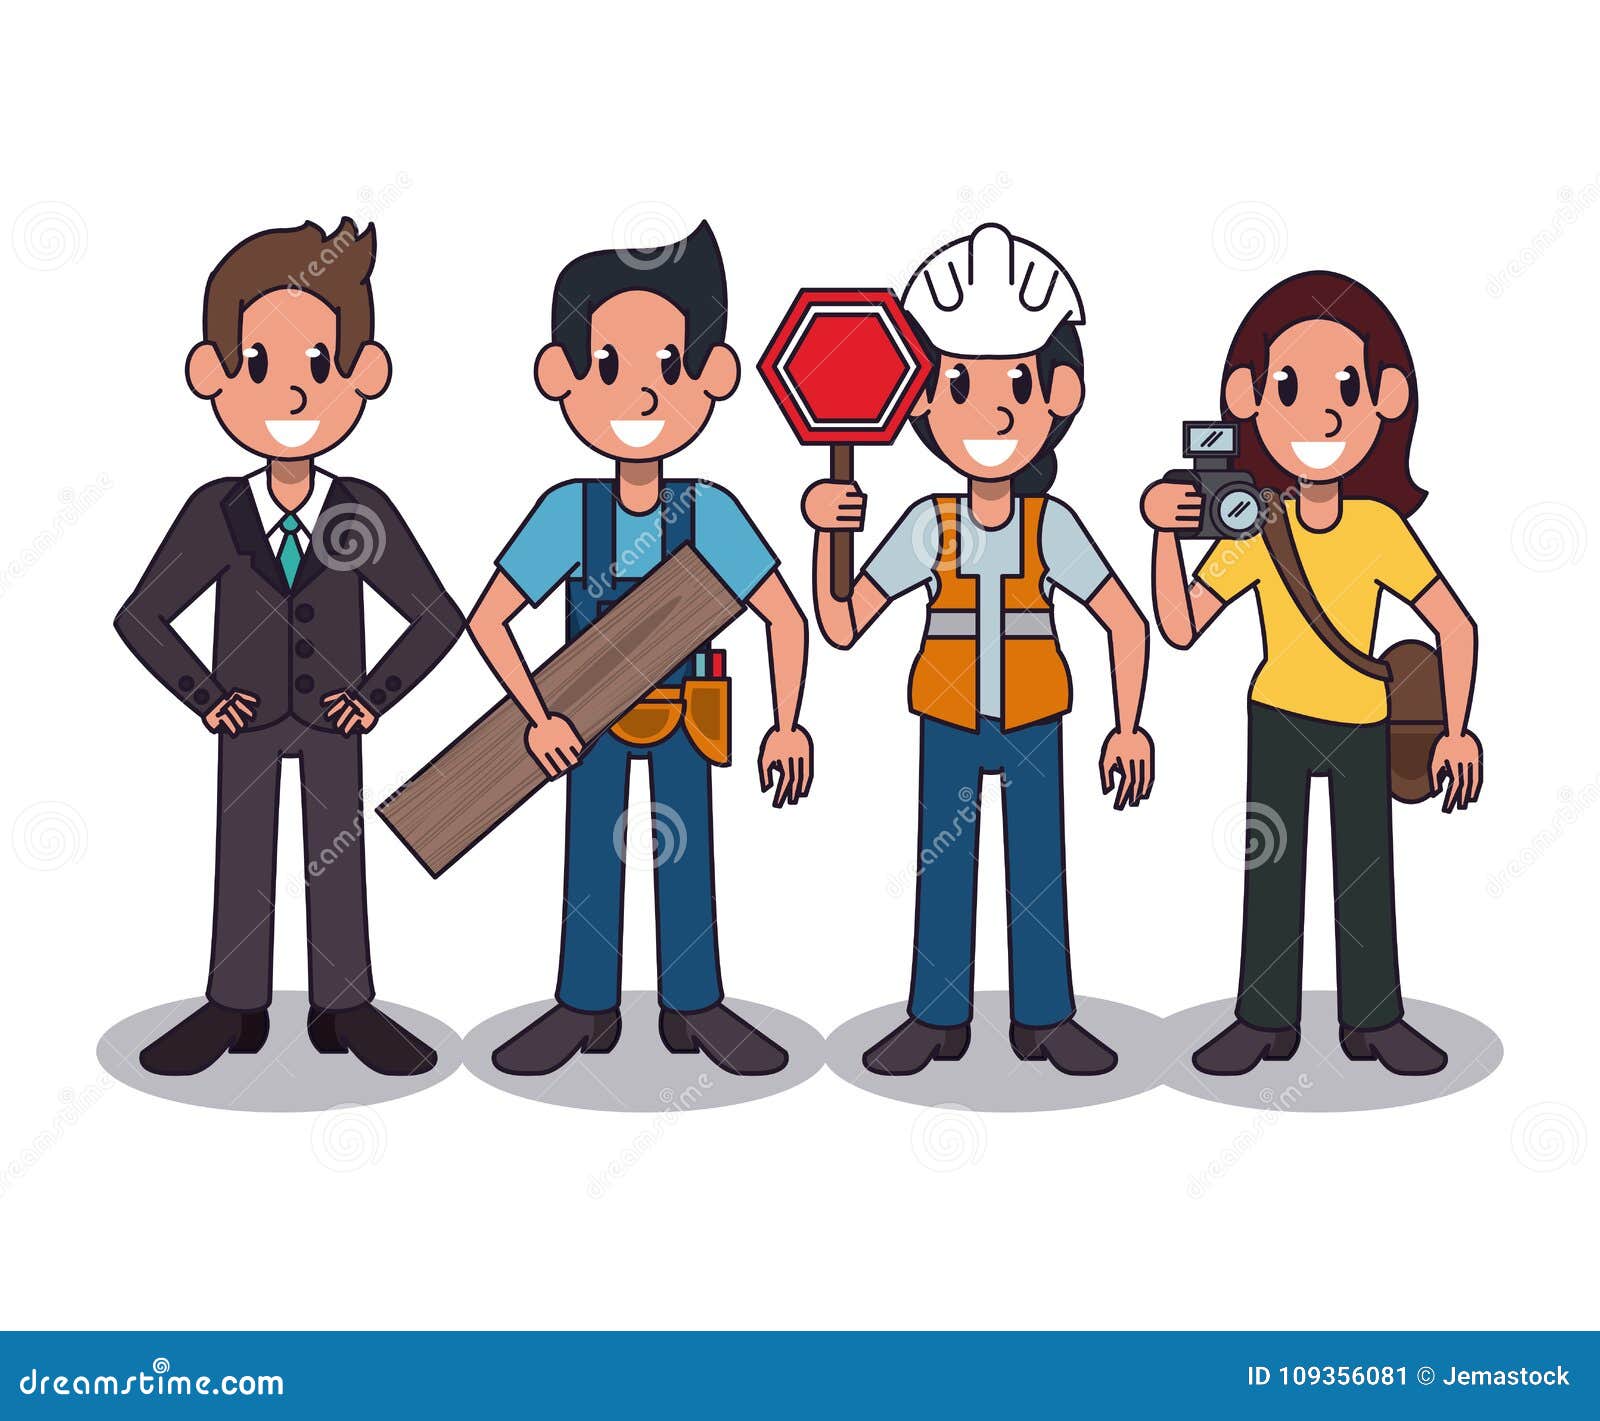 People workers cartoon stock vector. Illustration of manager - 109356081